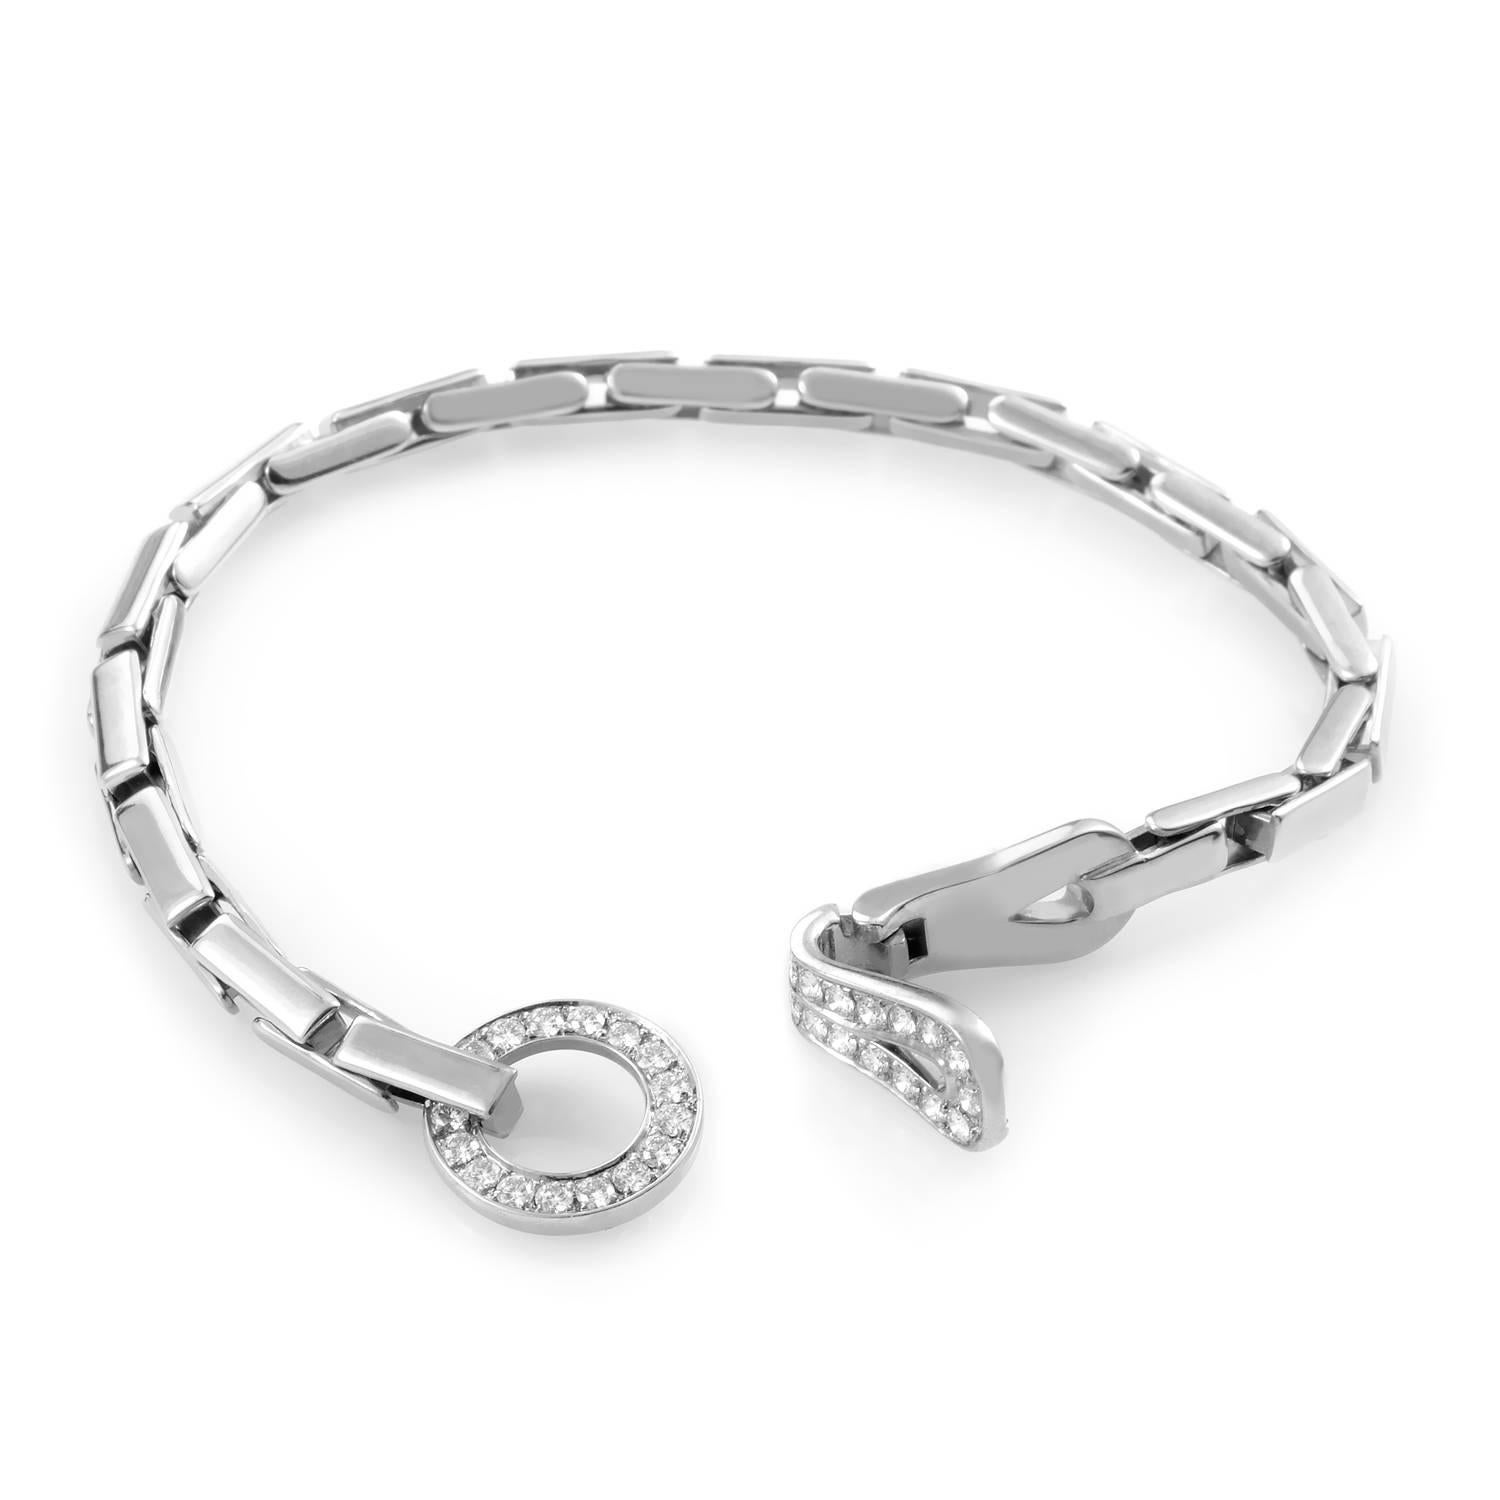 This sleek bracelet by Cartier is quintessentially understated glamour. The elegant anchor chain sleekly embraces the wrist while a classic hook-and-eye clasp is encrusted with ~1.30ct of diamonds that add a sparkle of luxury.
Included Items: